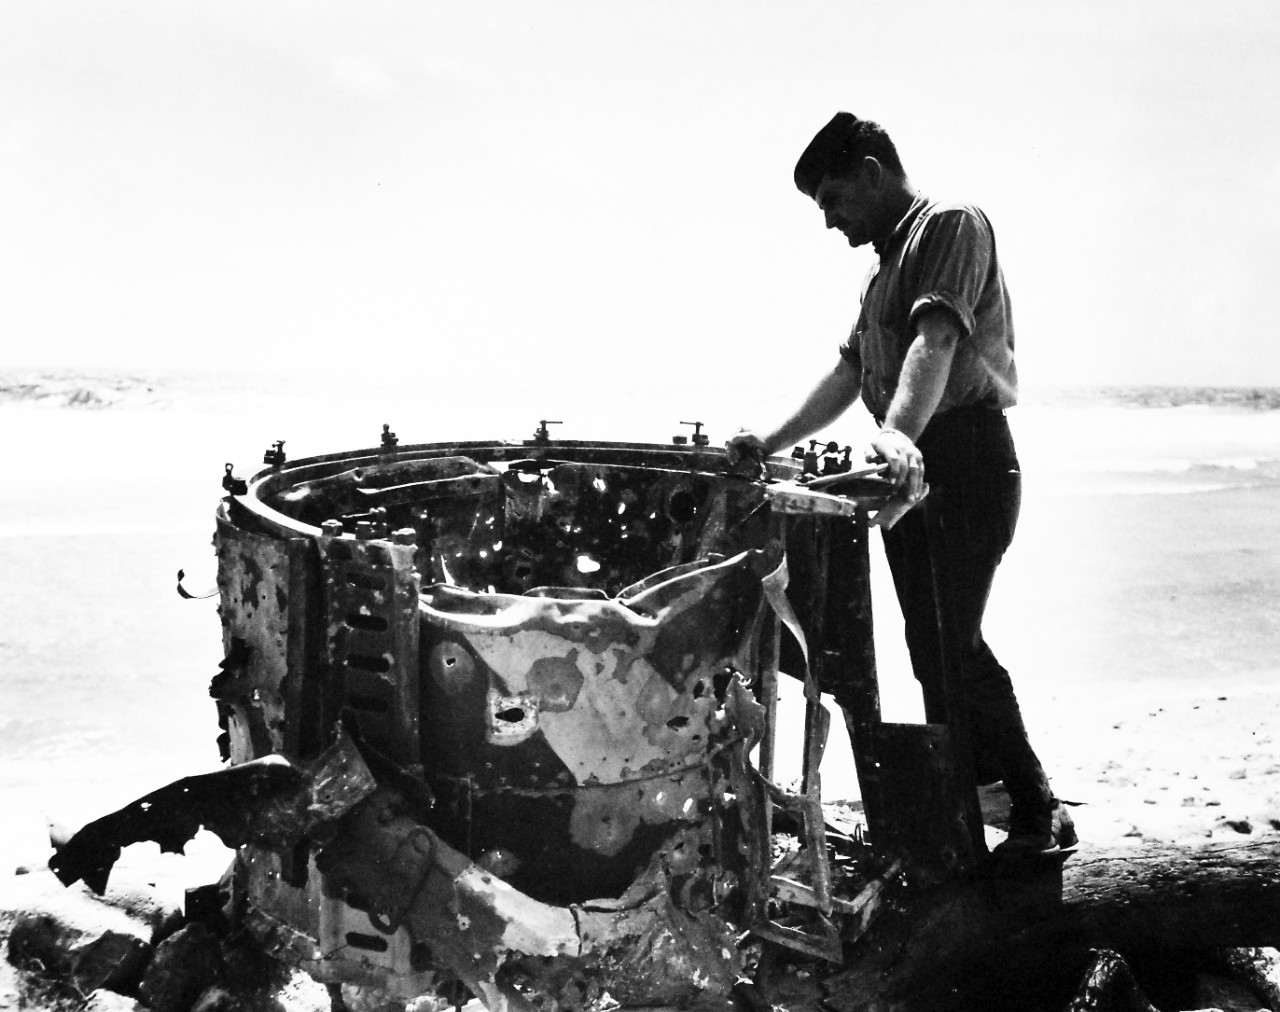 80-G-46526:  Operation Flintlock, January-February 1944.  Wreckage of Japanese searchlight found at the eastern end of Kwajalein Island, Marshall Islands.   Released September 19, 1944.  Official  U.S. Navy Photograph, now in the collections of the National Archives.  (2016/06/07).